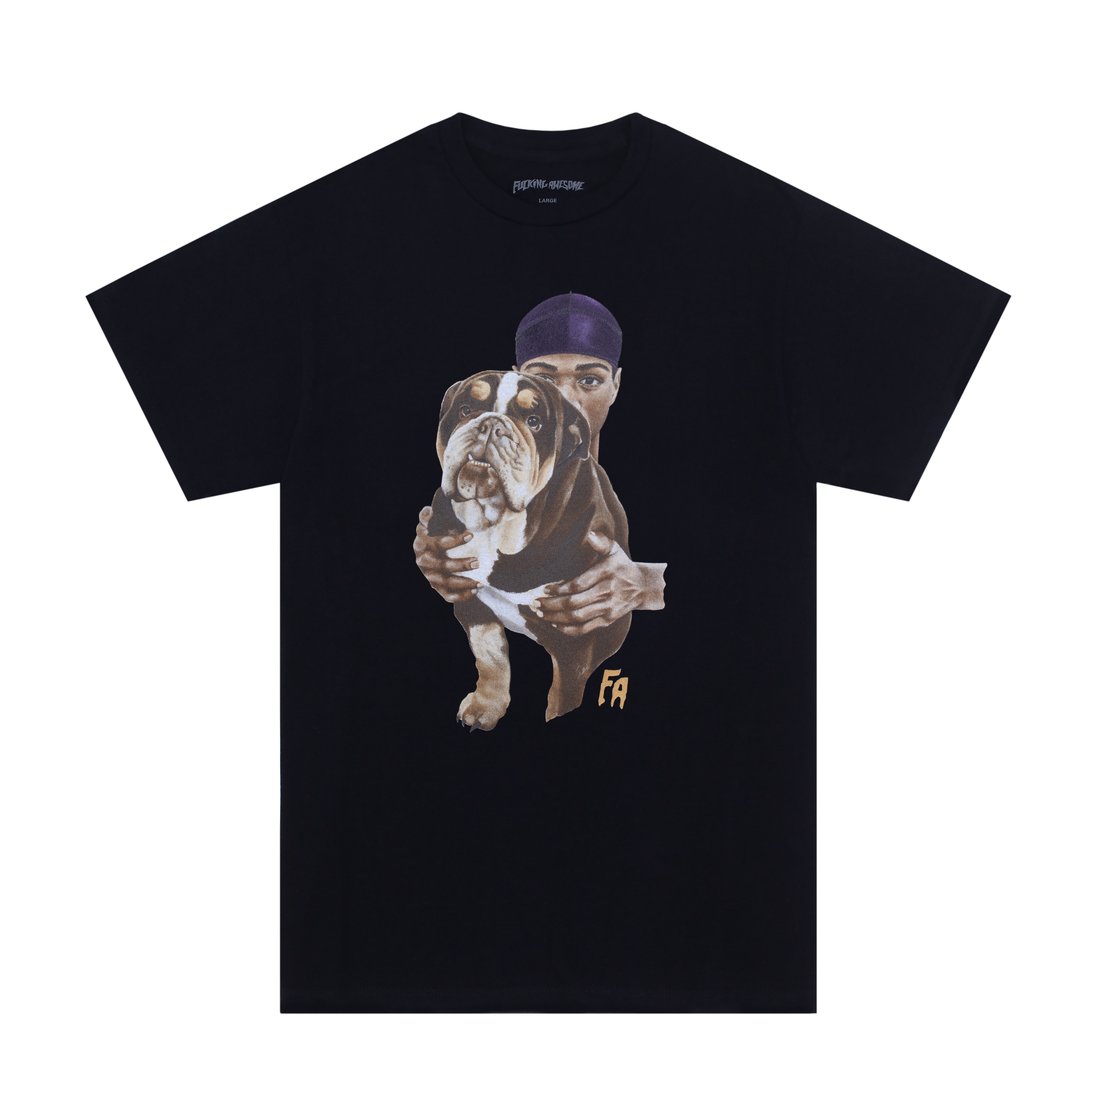 TJ Dog Tee S/S Tee Shirt Blk (size options listed)